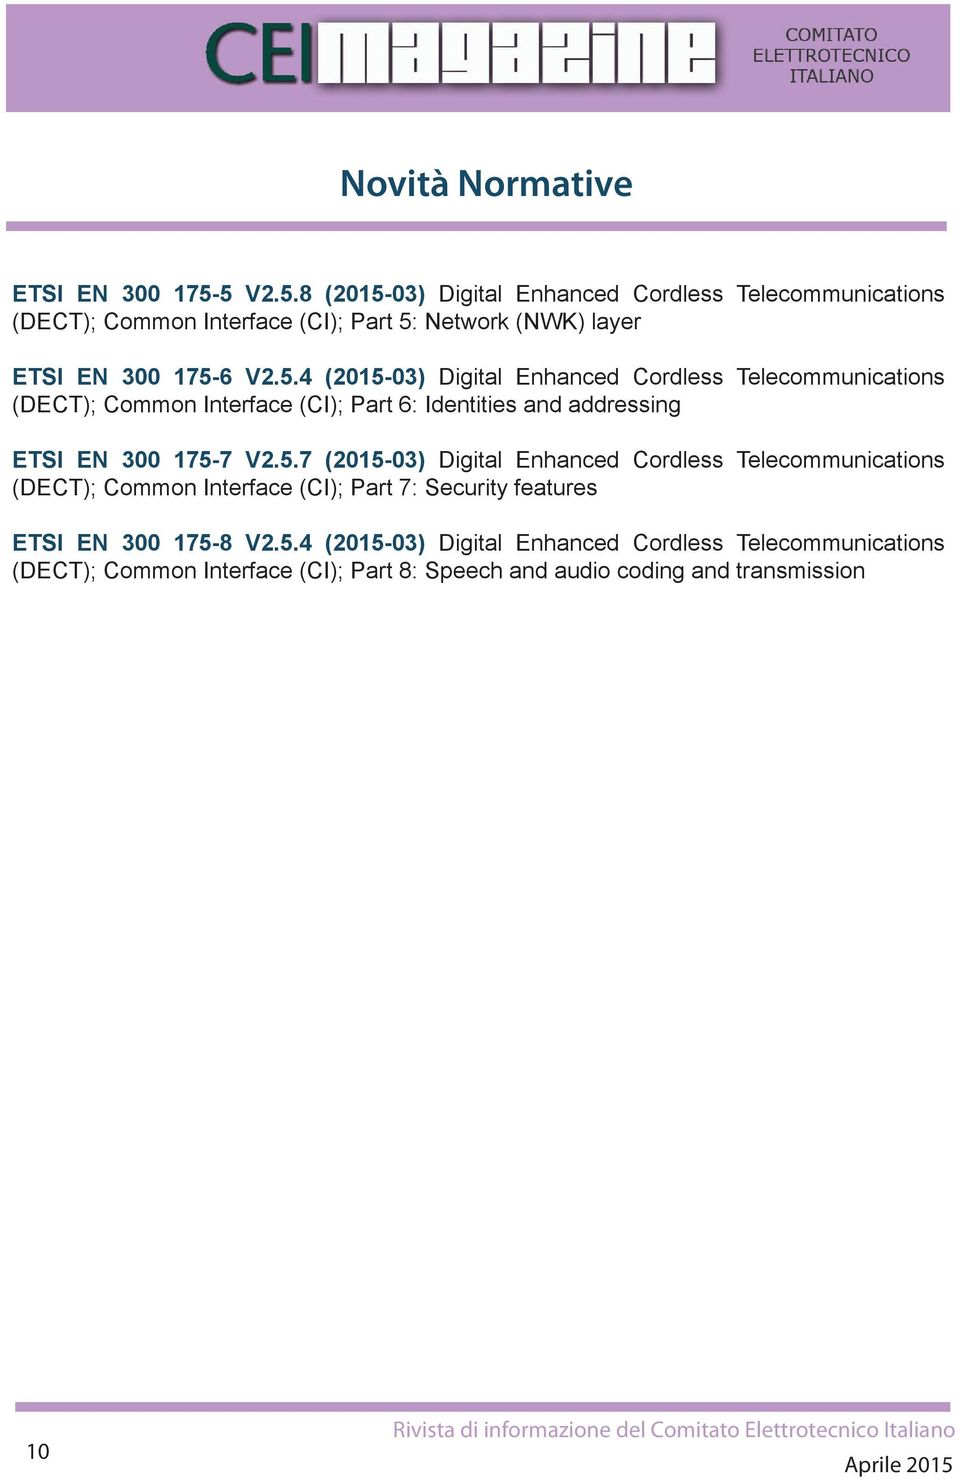 5.7 (2015-03) Digital Enhanced Cordless Telecommunications (DECT); Common Interface (CI); Part 7: Security features 8 V2.5.4 (2015-03) Digital Enhanced Cordless Telecommunications (DECT); Common Interface (CI); Part 8: Speech and audio coding and transmission 10